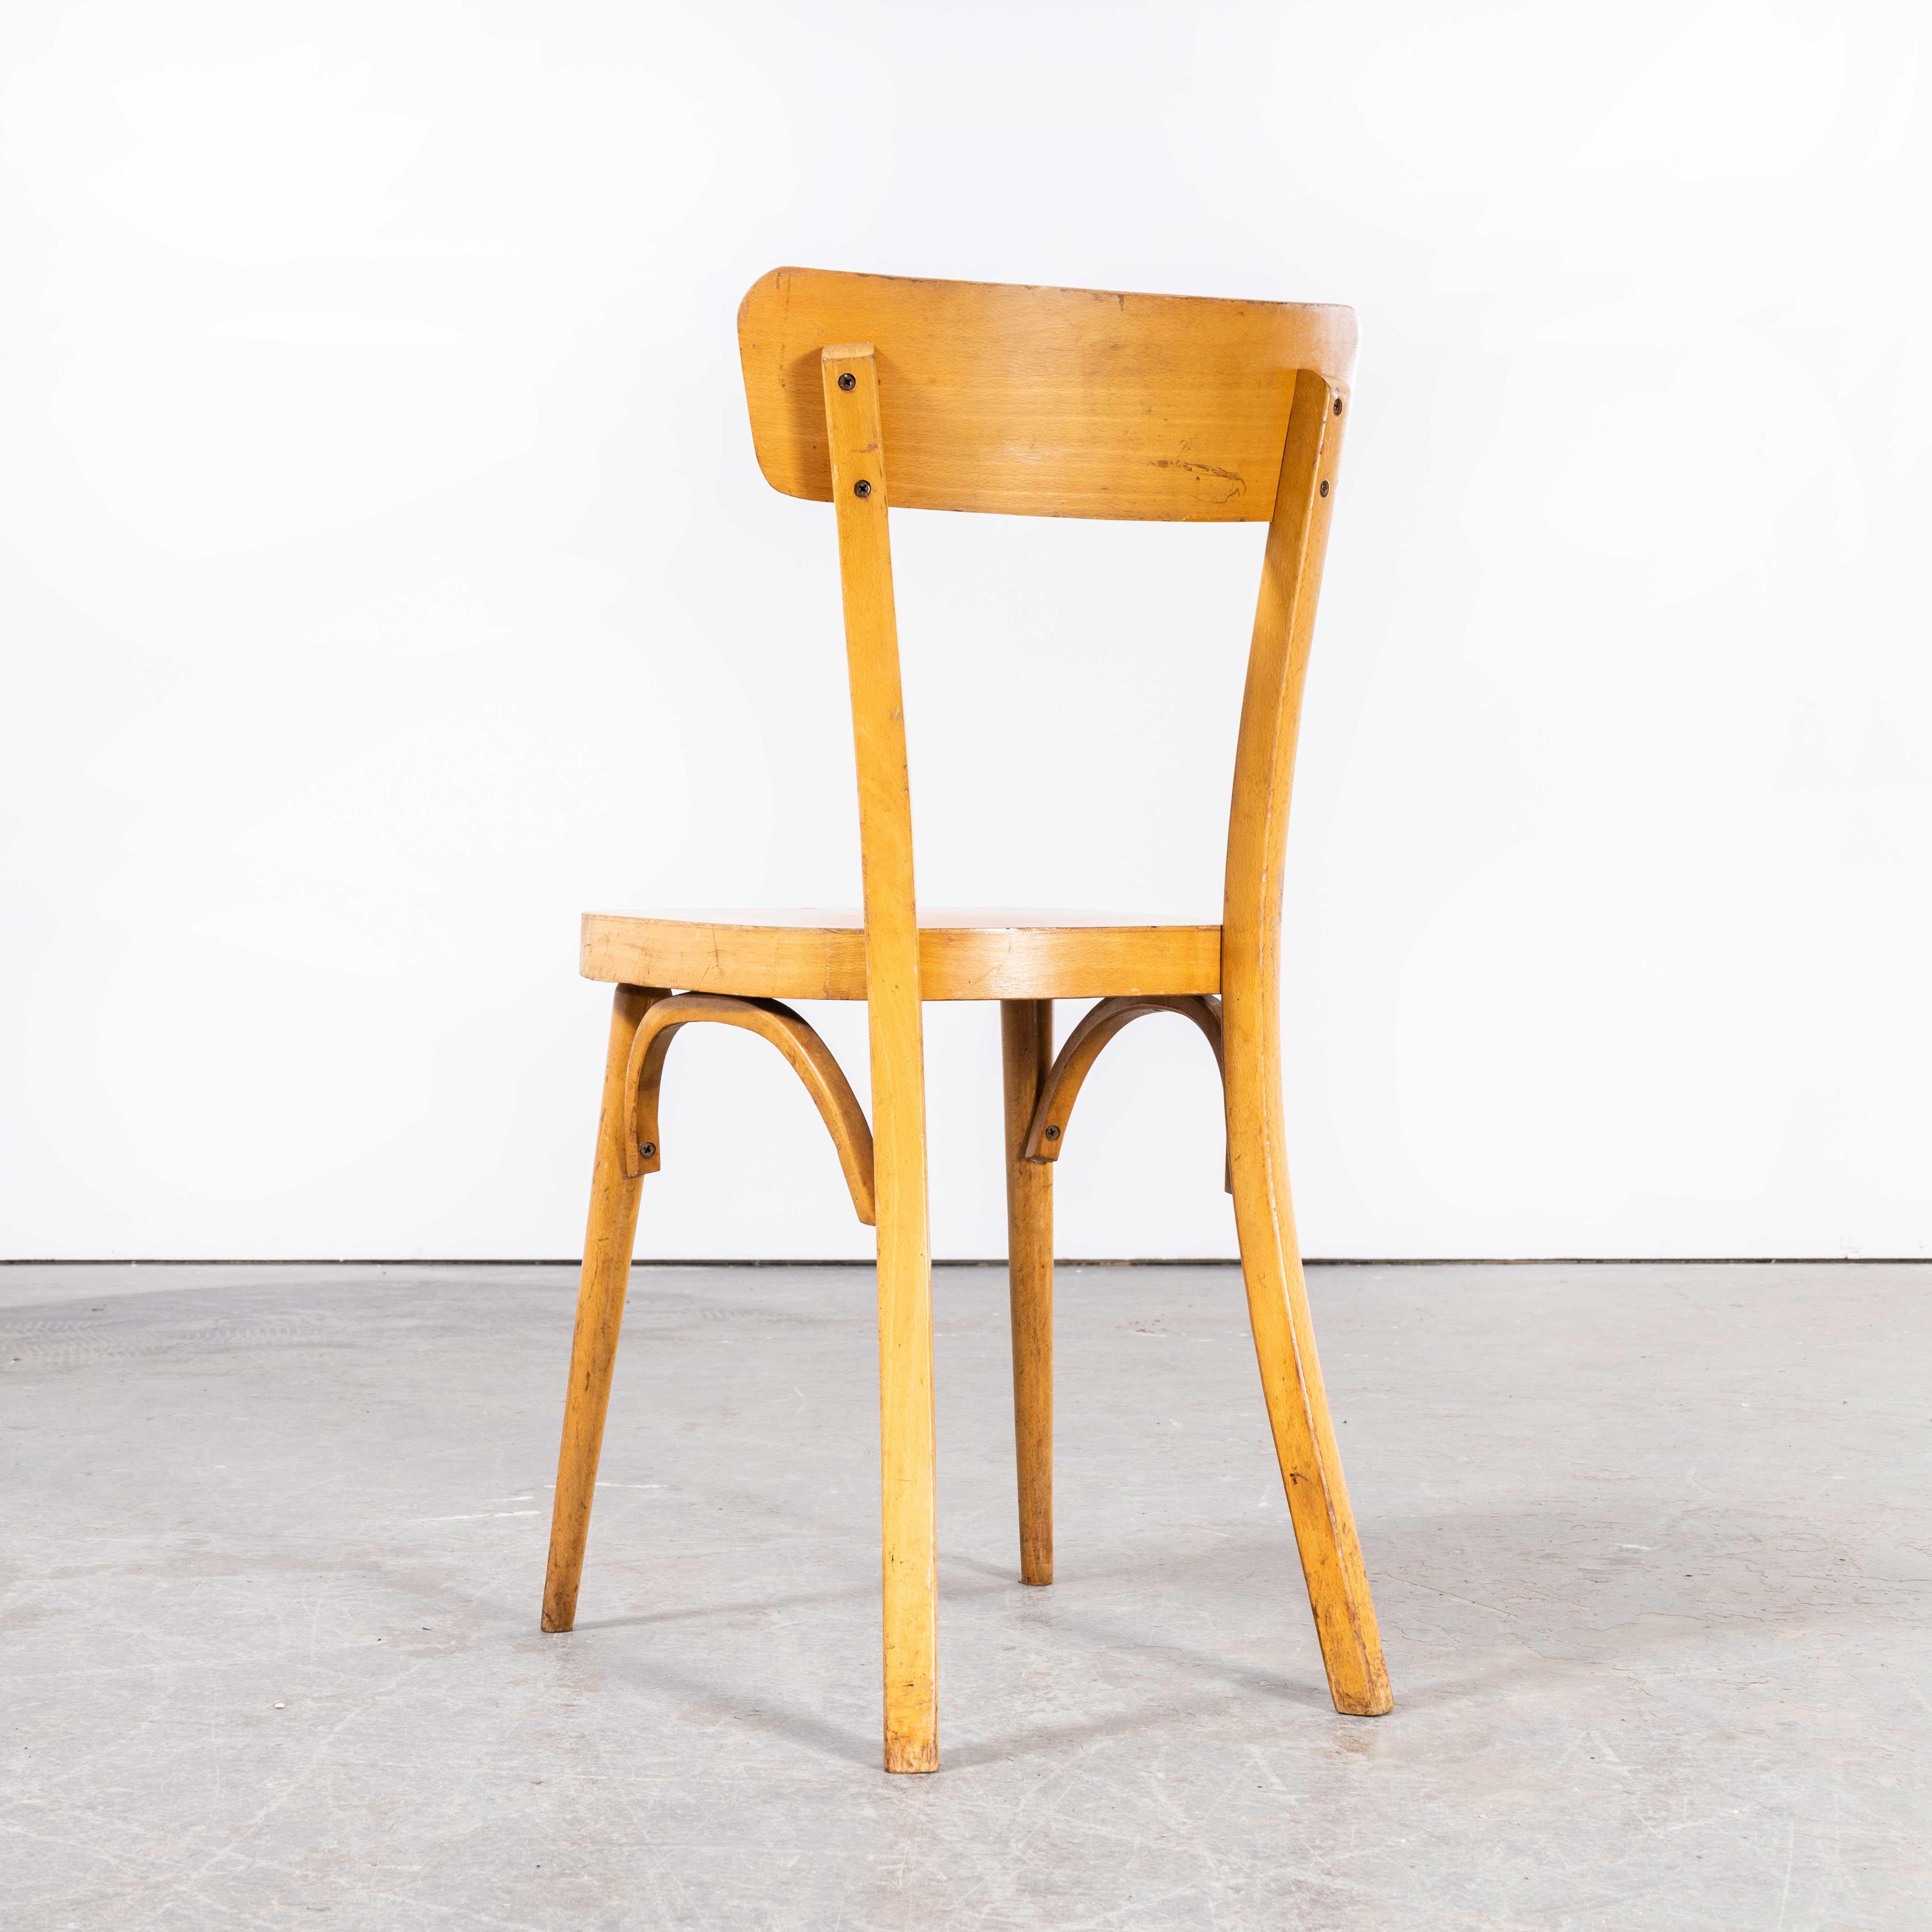 1950’s French Baumann blonde round leg bentwood dining chairs – set of six
1950’s French Baumann blonde round leg bentwood dining chairs – set of six. Baumann is a slightly off the radar French producer just starting to gain traction in the market.